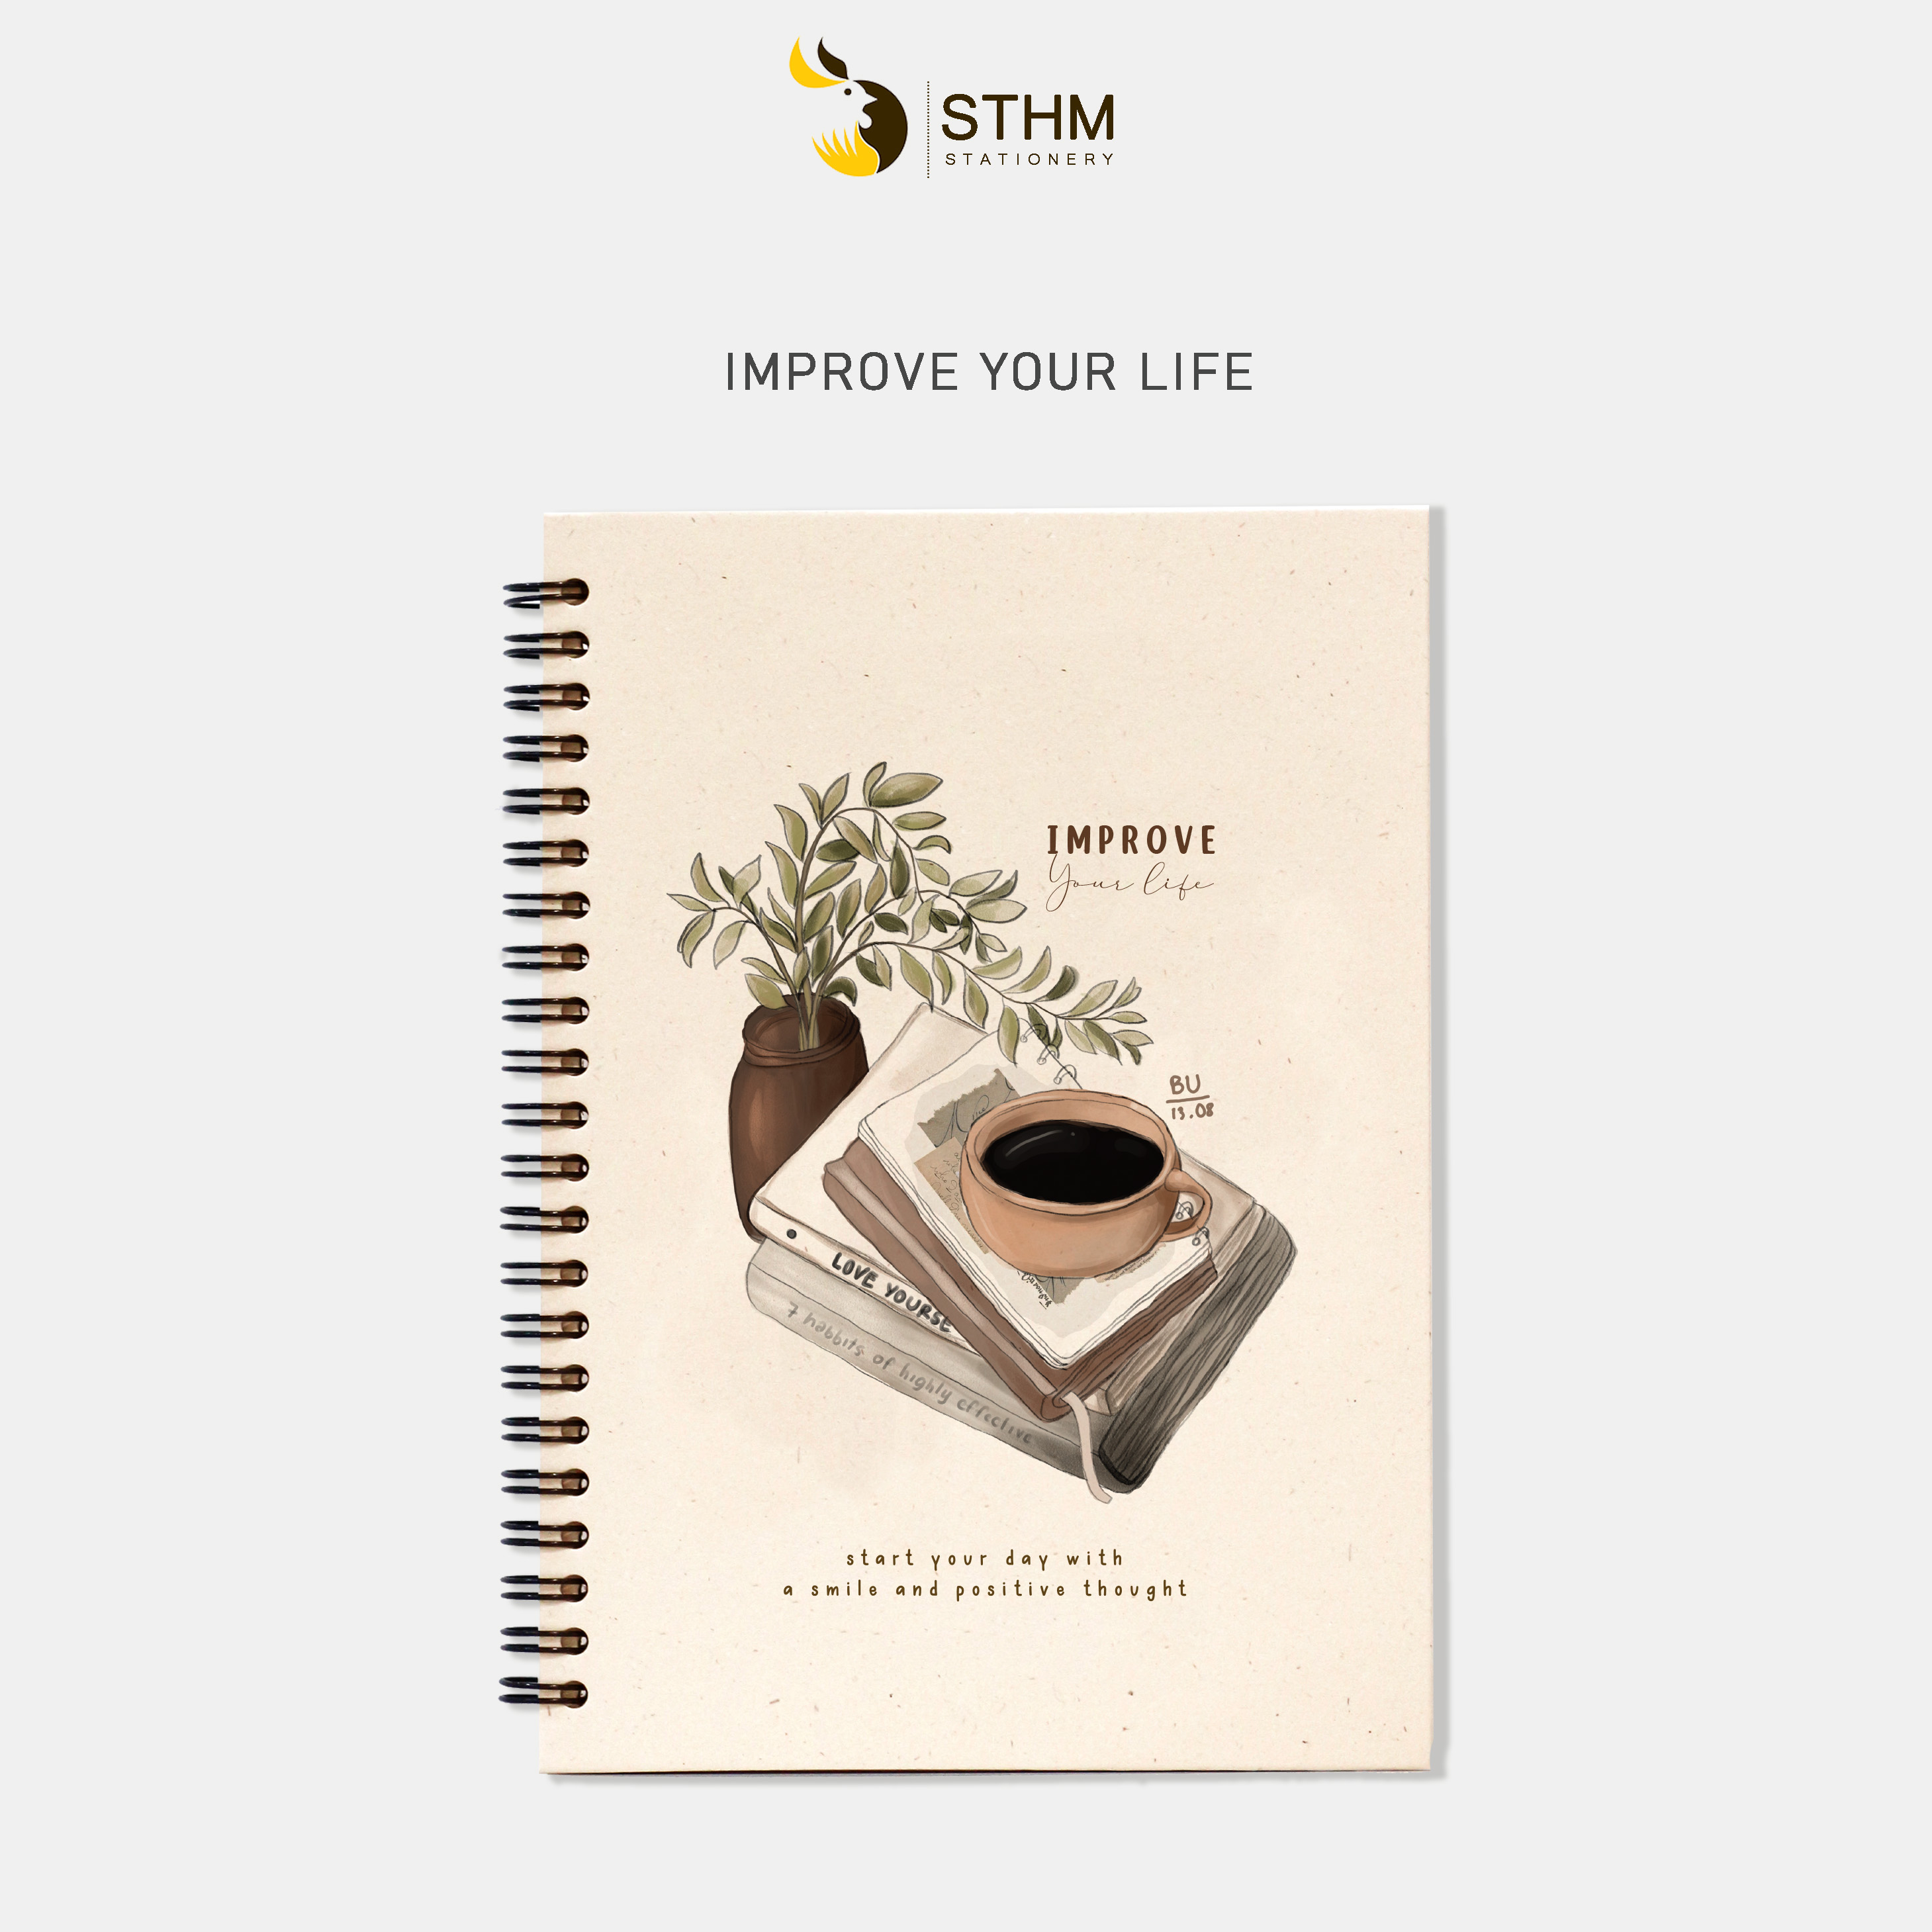 Improve your life - Sổ tay bìa cứng A5 - 021 - STHM stationery